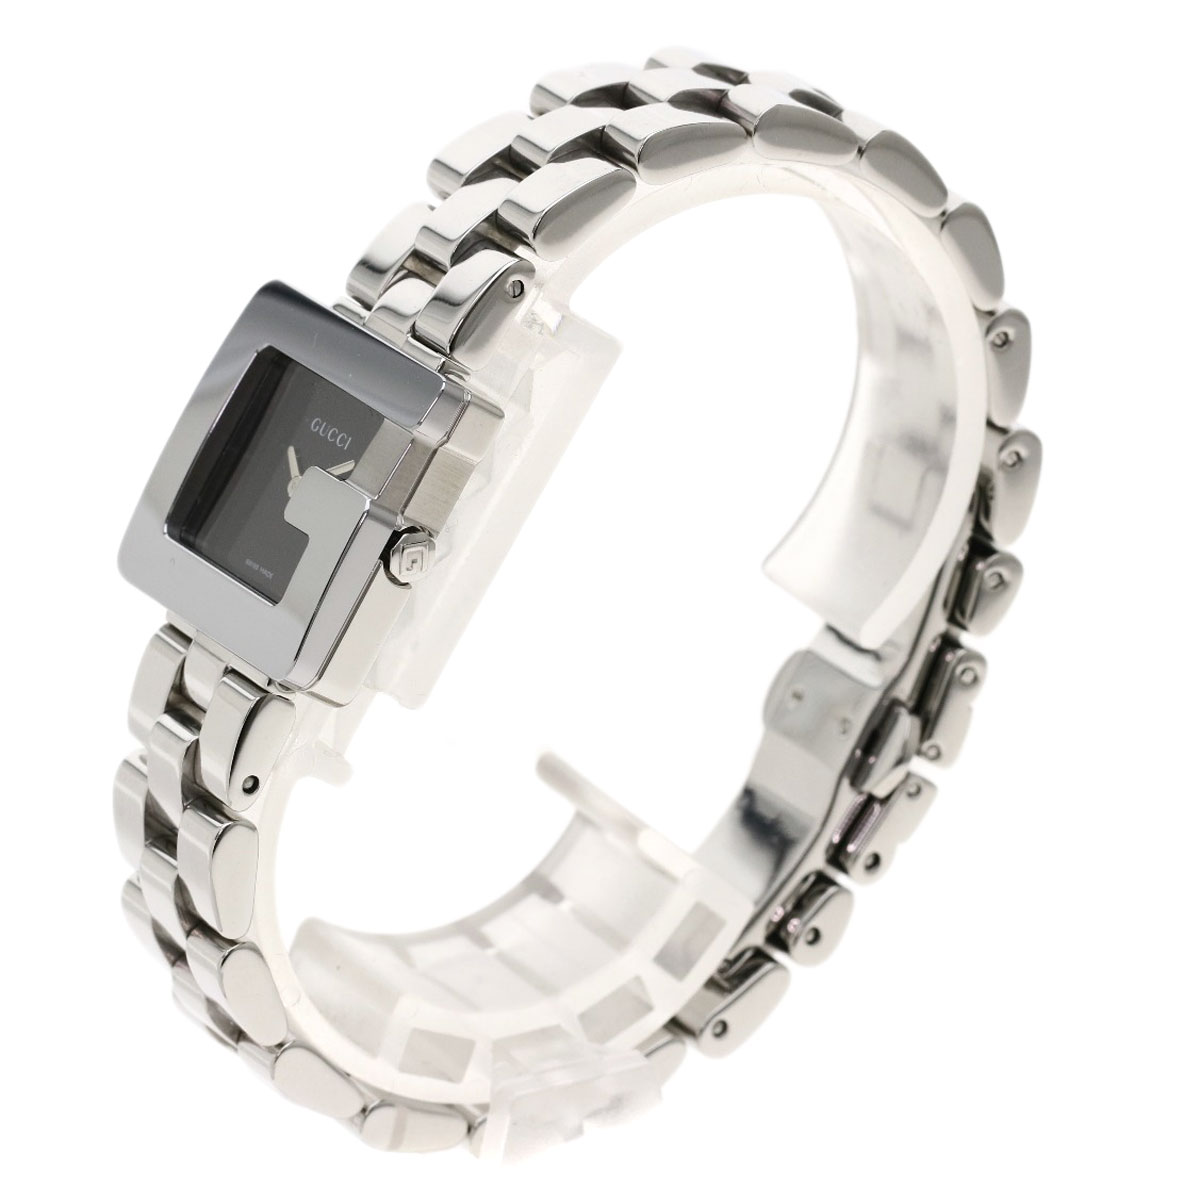 GUCCI Square face Watches 3600L Stainless Steel/Stainless Steel Ladies ...